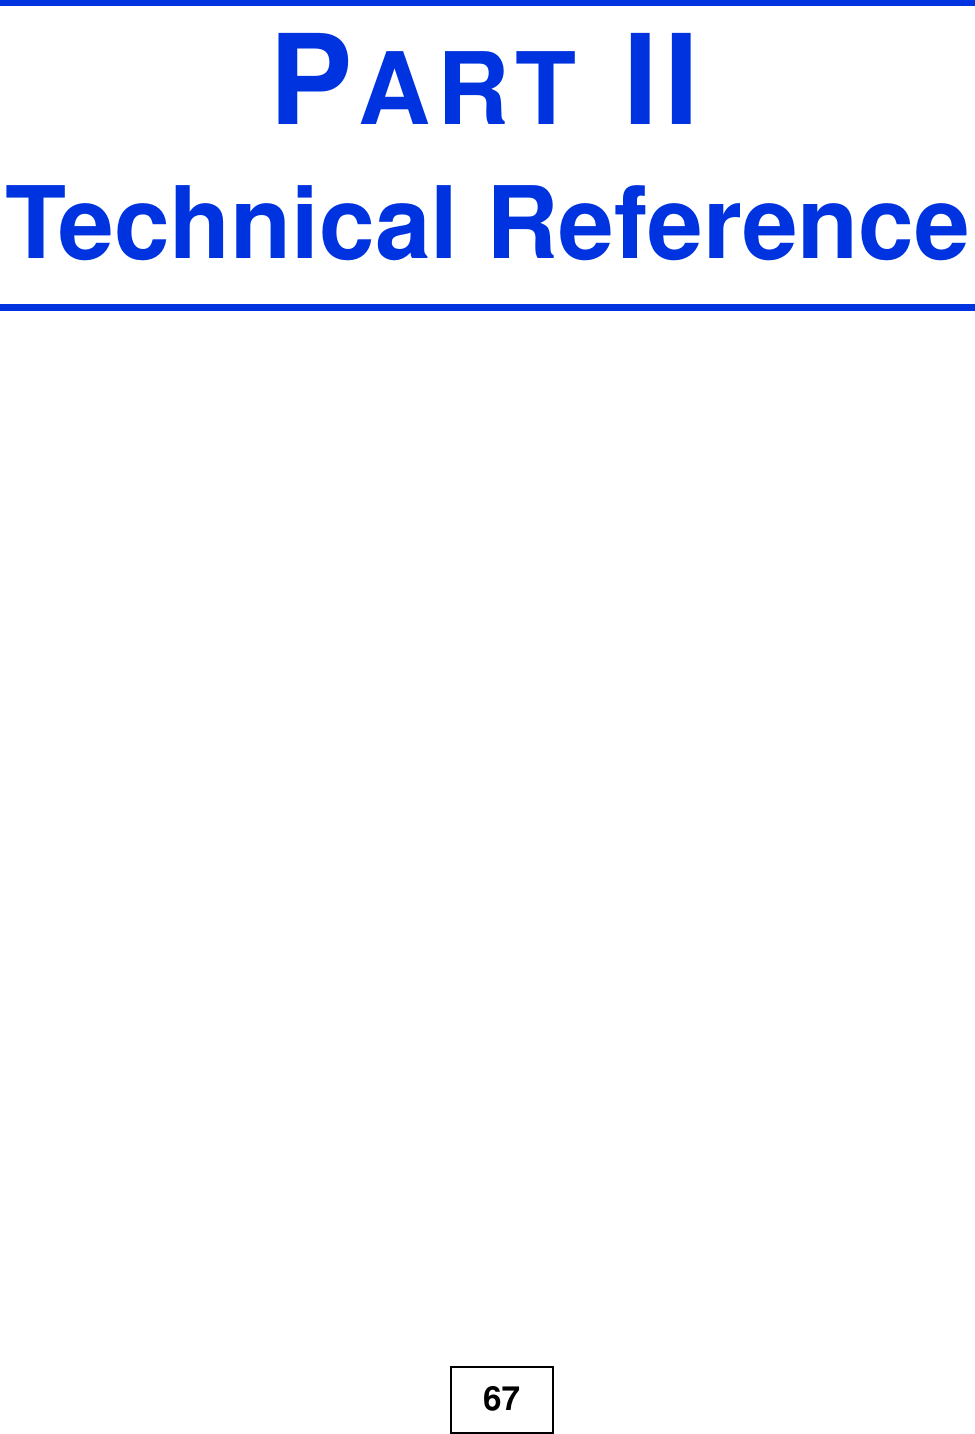 67PART IITechnical Reference